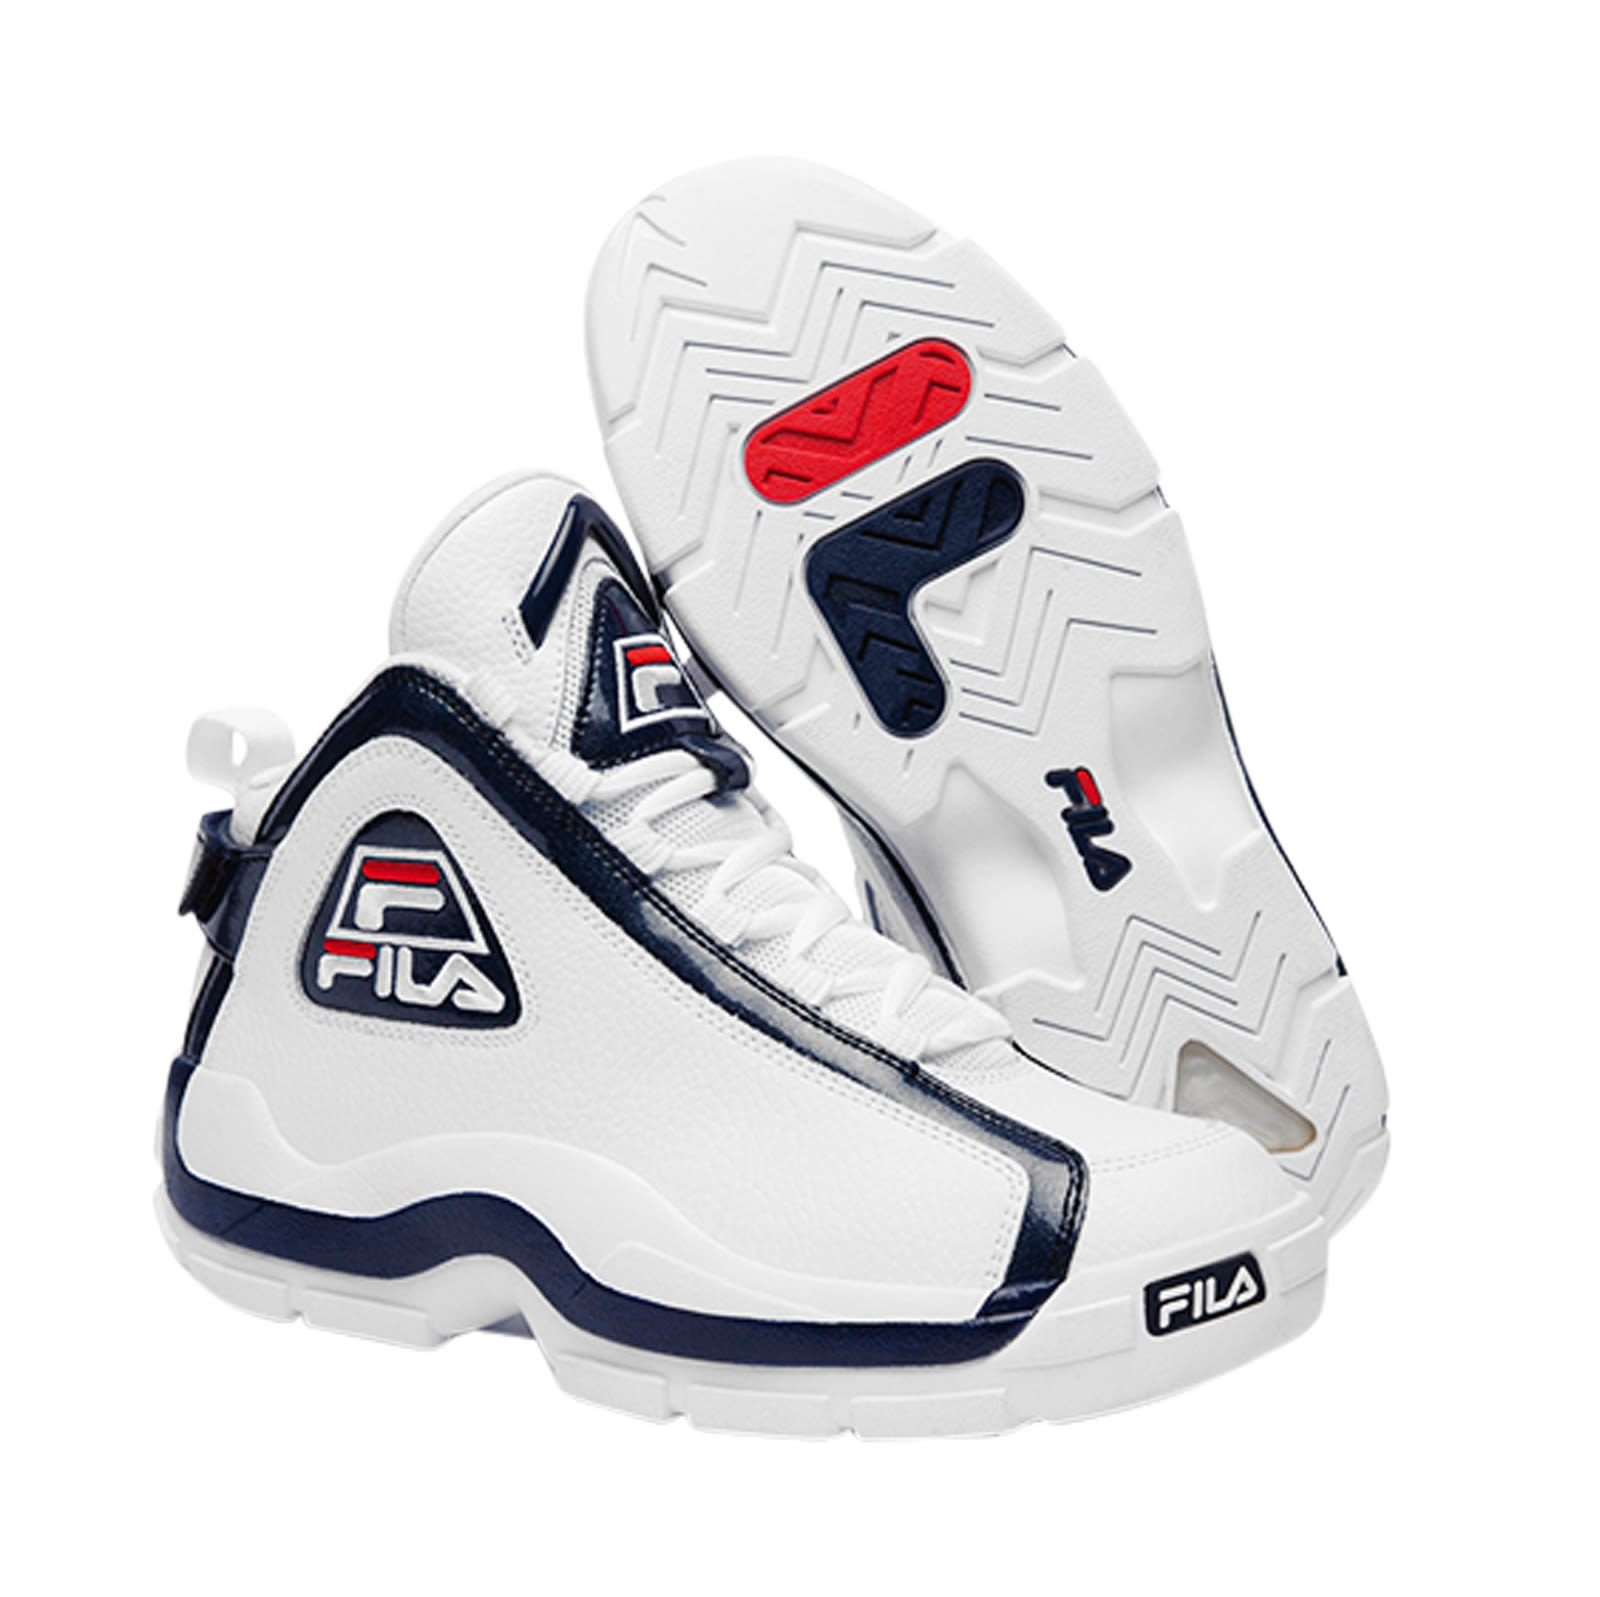 Outlaw Sygdom kaste Story of a brand: FILA | Courier